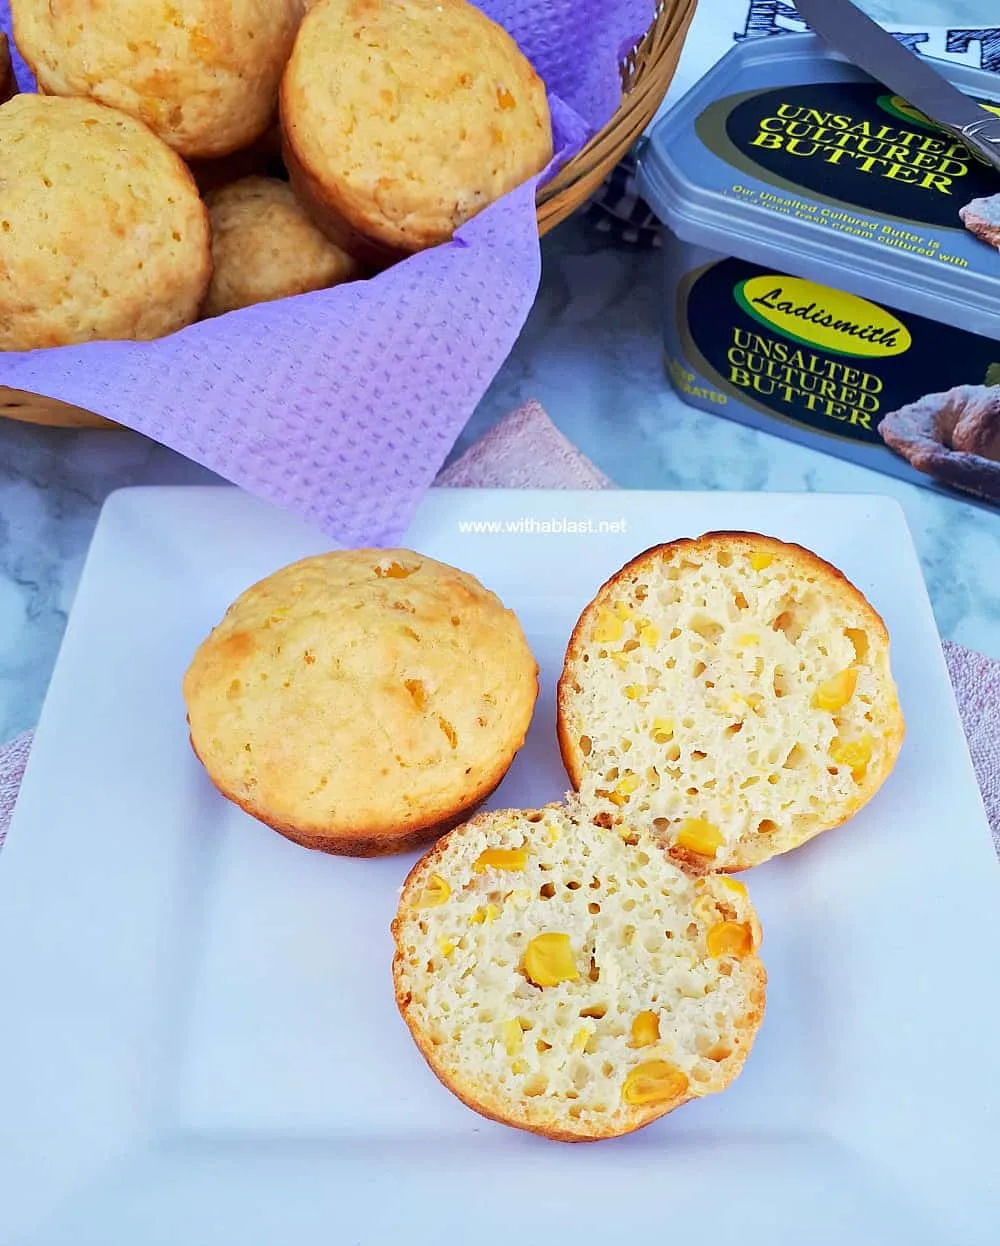 Sweetcorn Muffins are soft, fluffy and quick enough to make (all standard pantry ingredients) as an addition to breakfast or serve as a snack